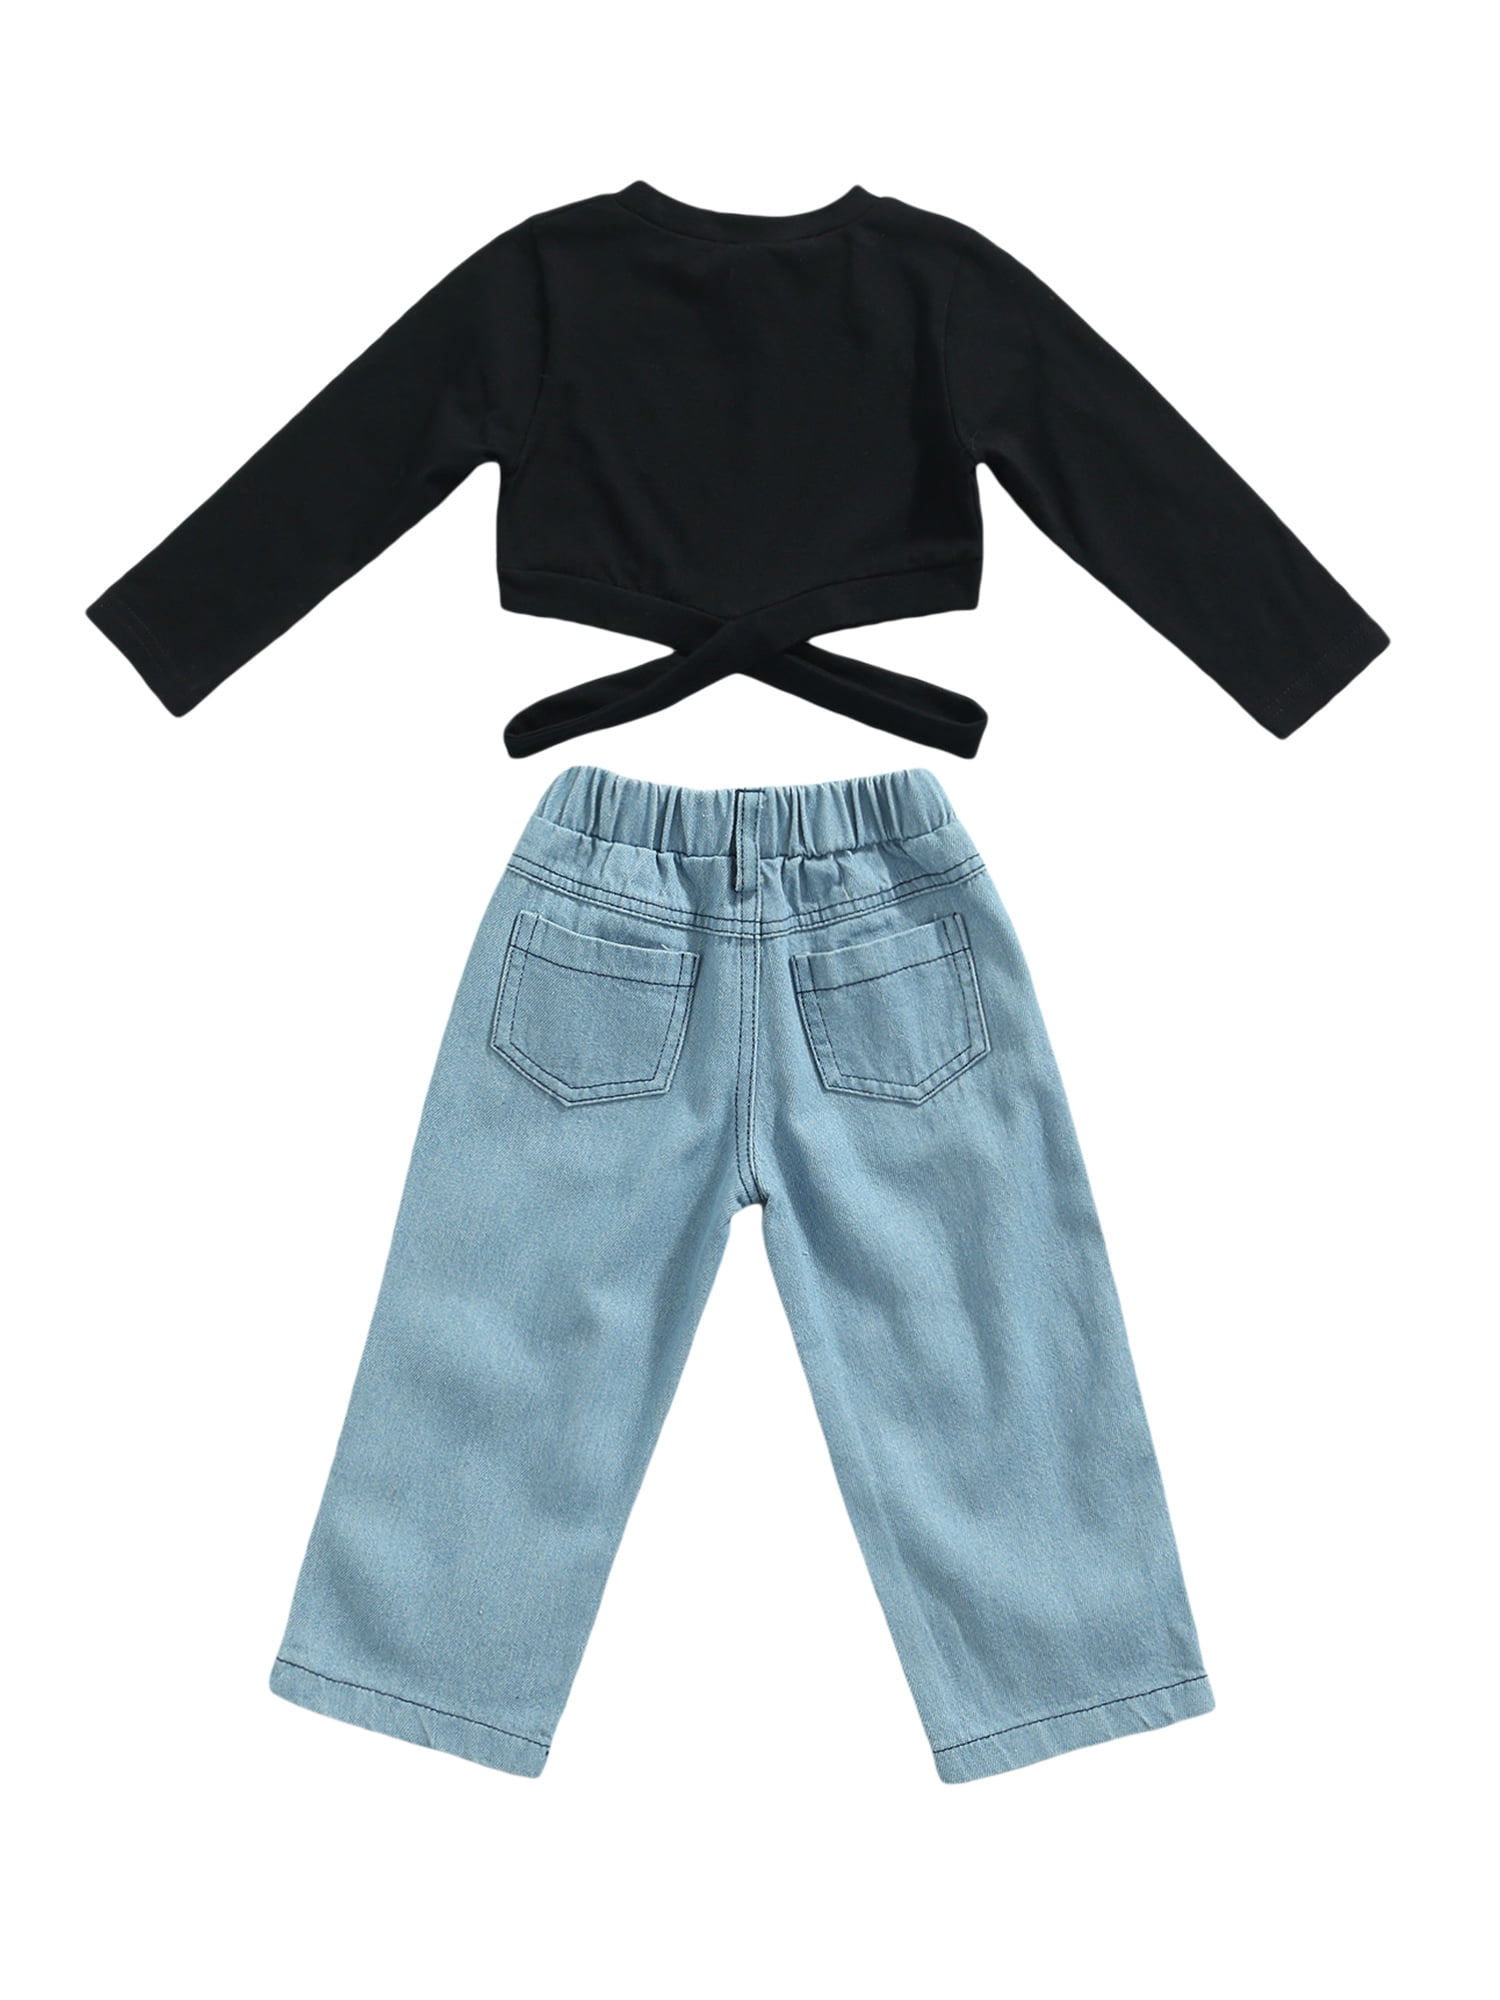 Girls Jeans Tops - Buy Girls Jeans Tops online in India